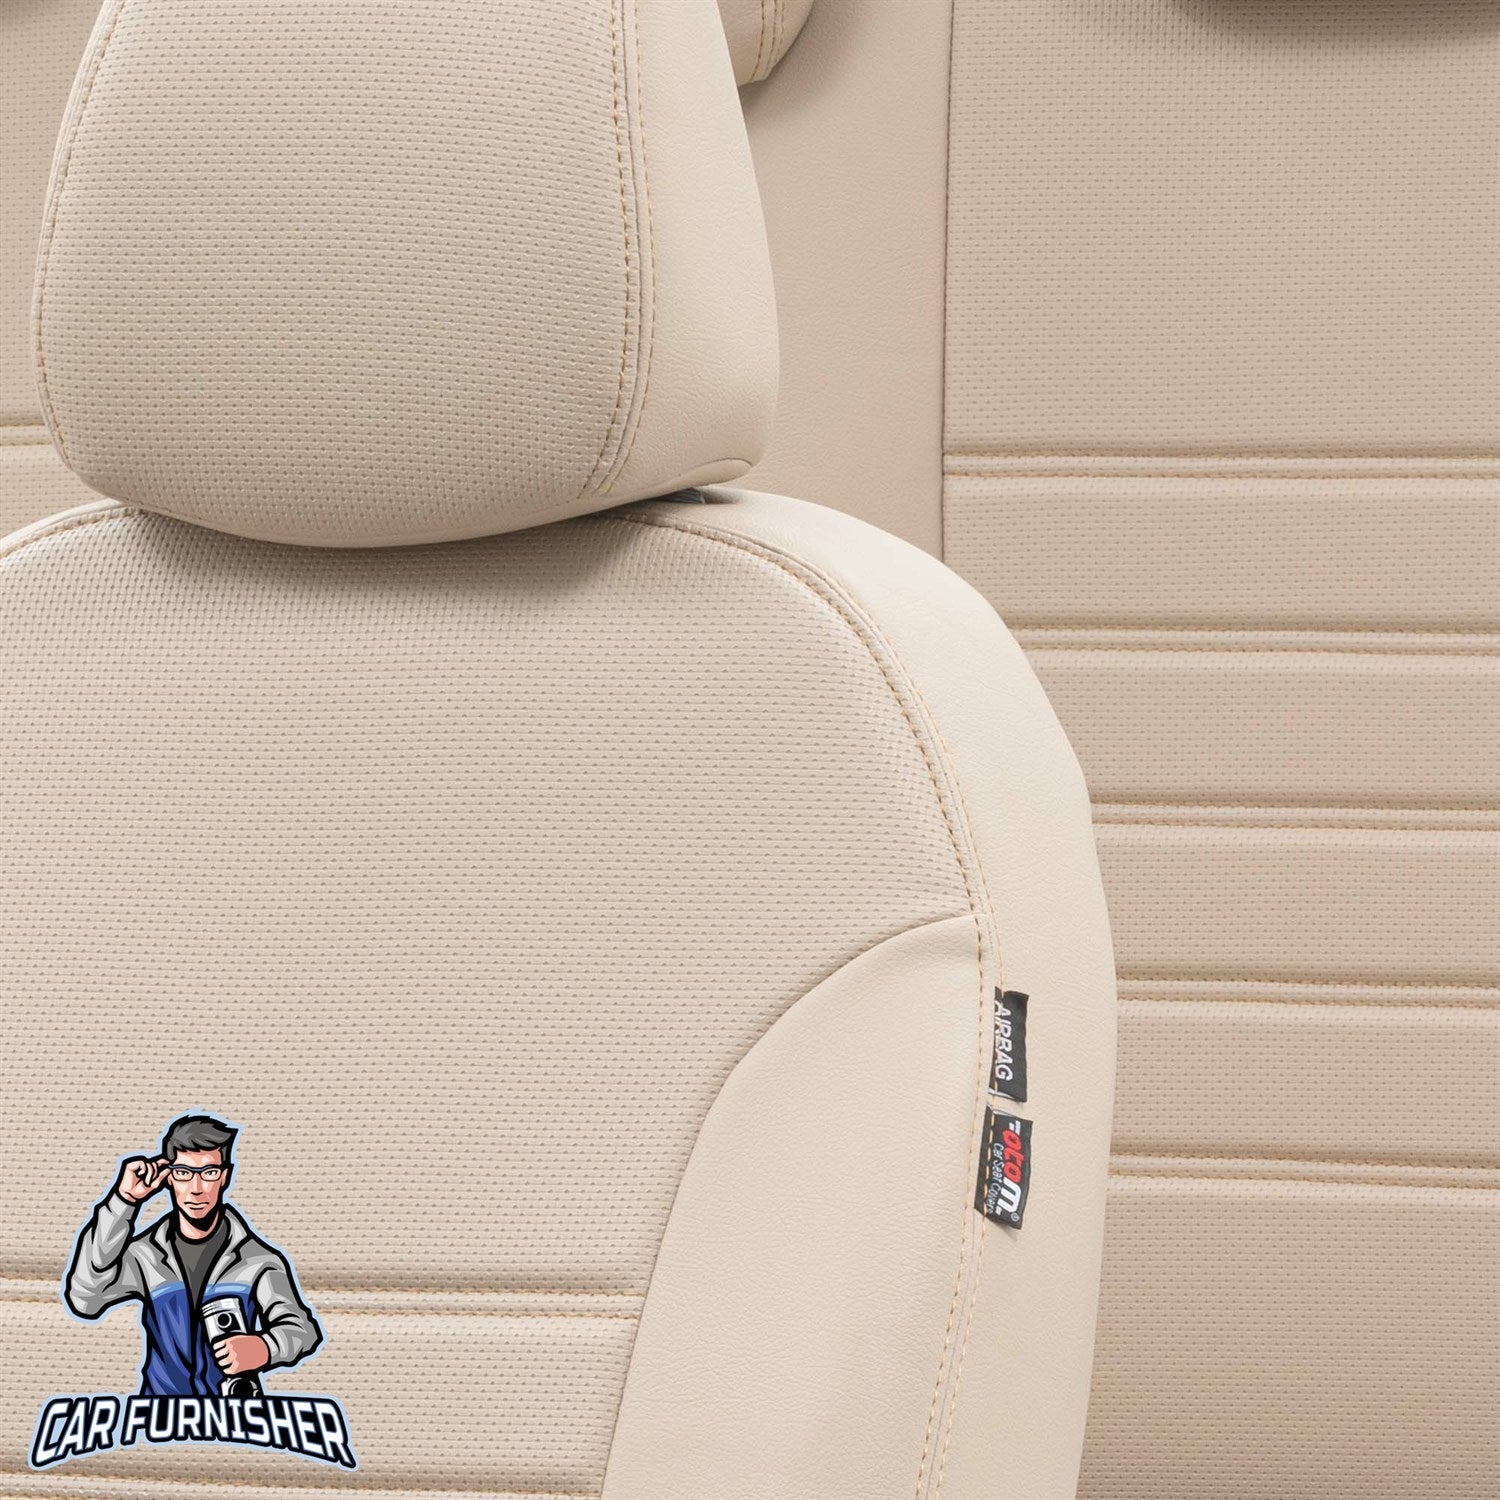 Volvo XC90 Seat Cover New York Leather Design Beige Leather